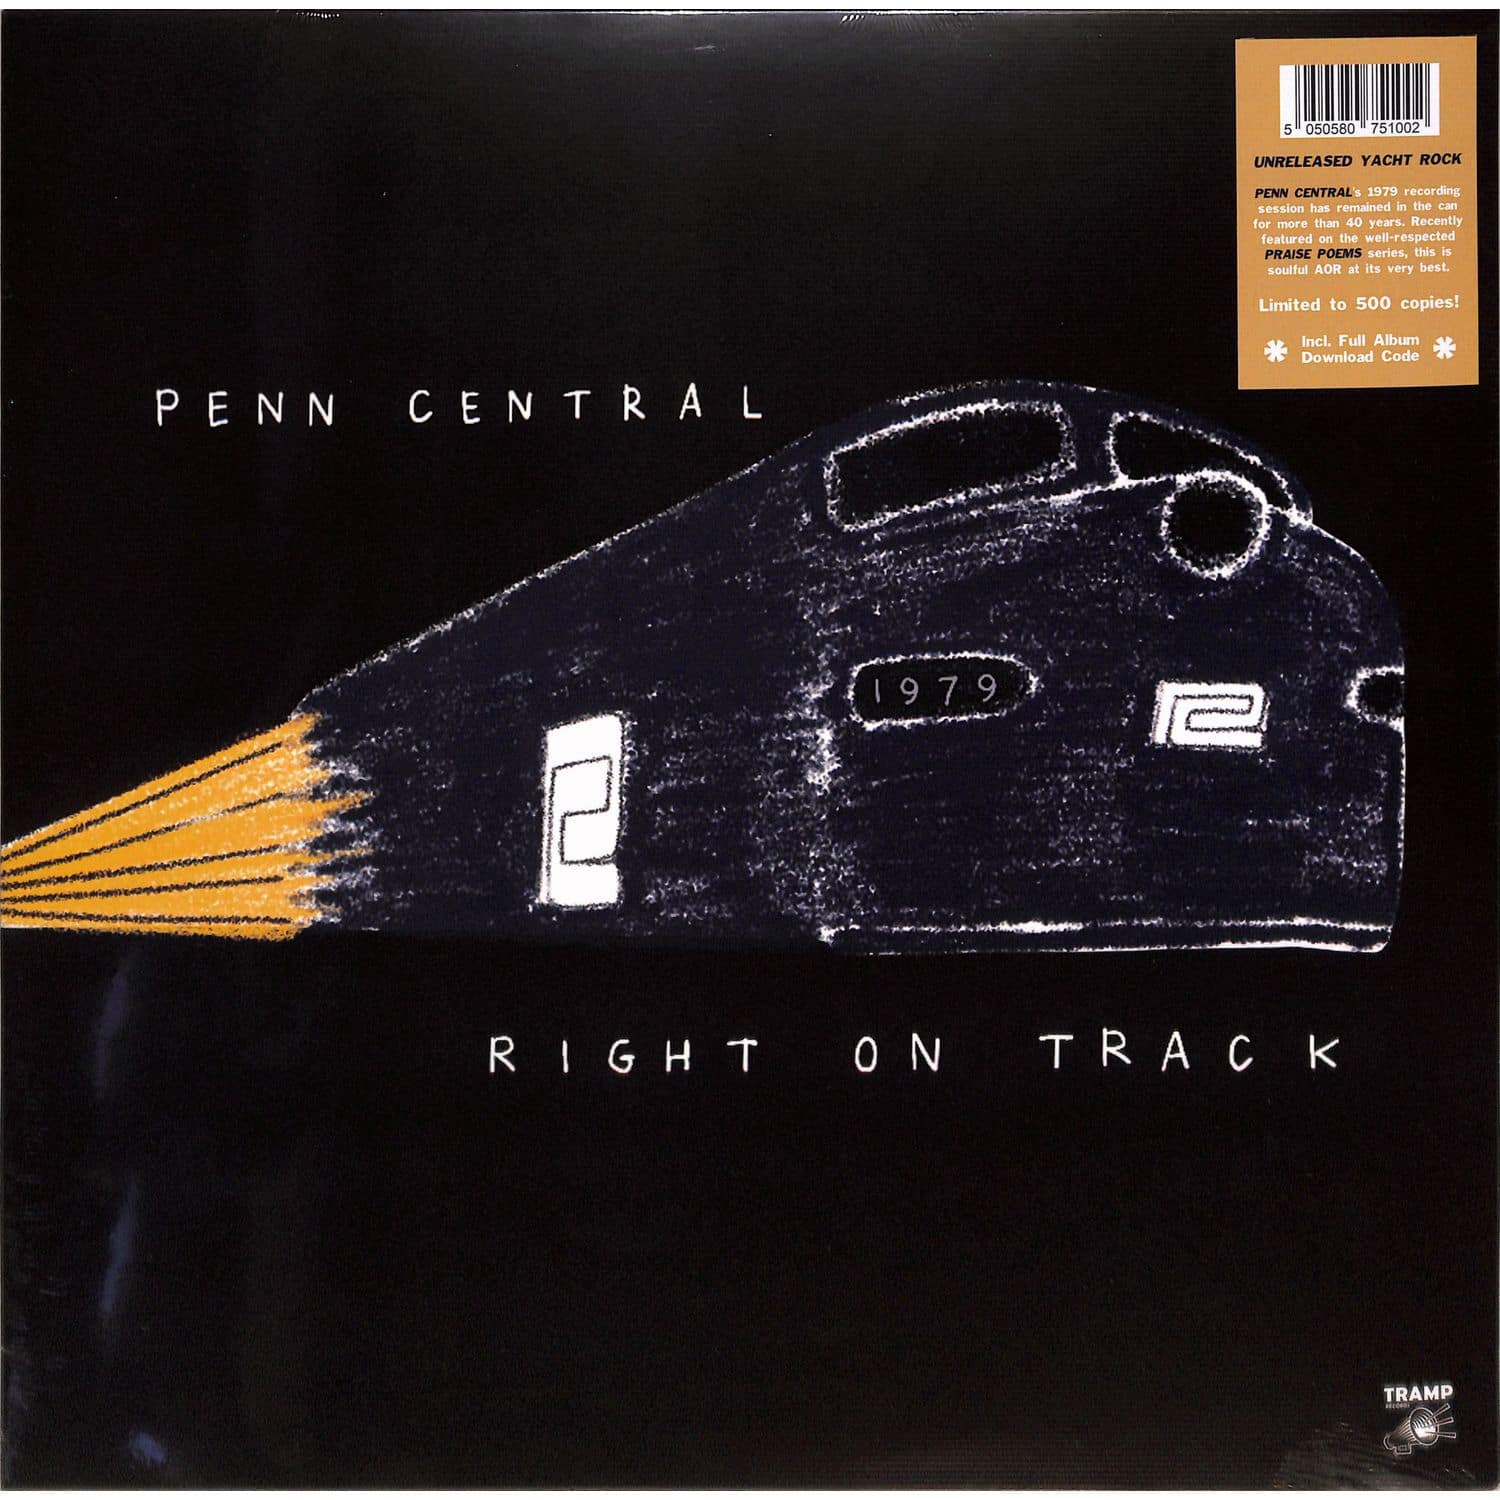 Penn Central - RIGHT ON TRACK 